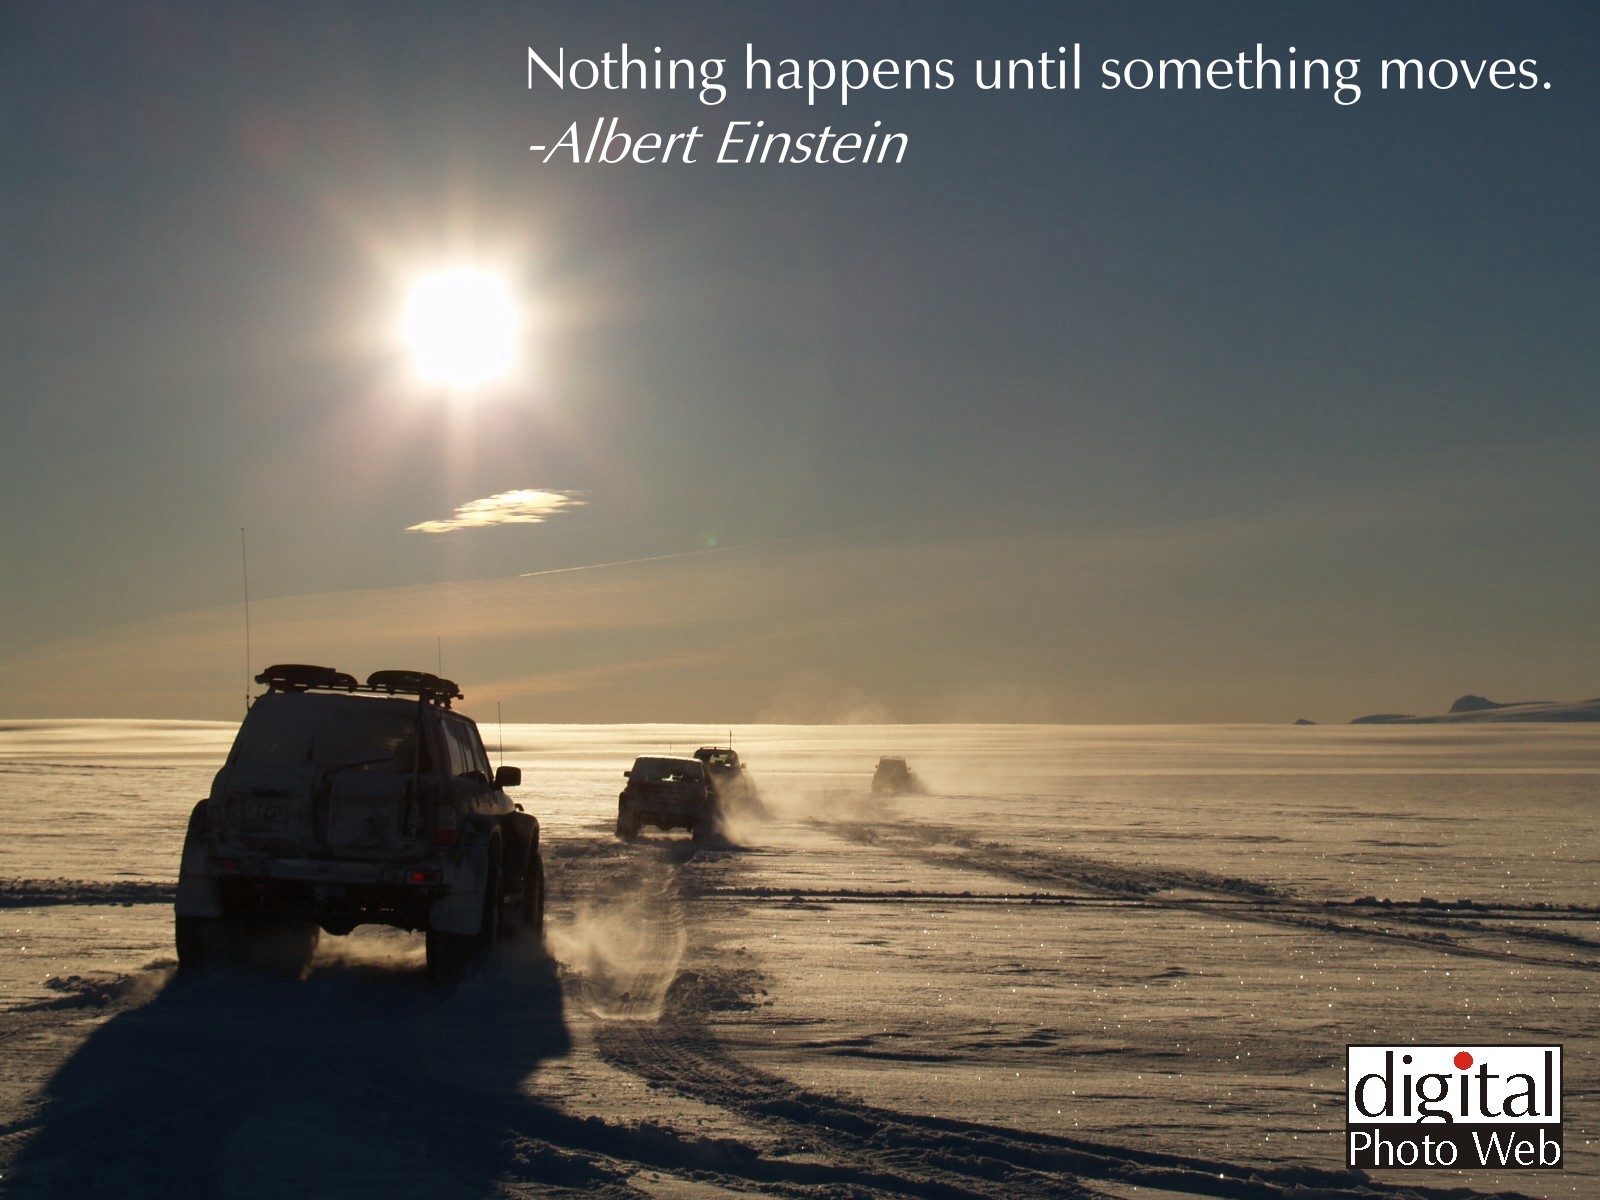 Free Truck Wallpaper Photos with Inspiring Quotations